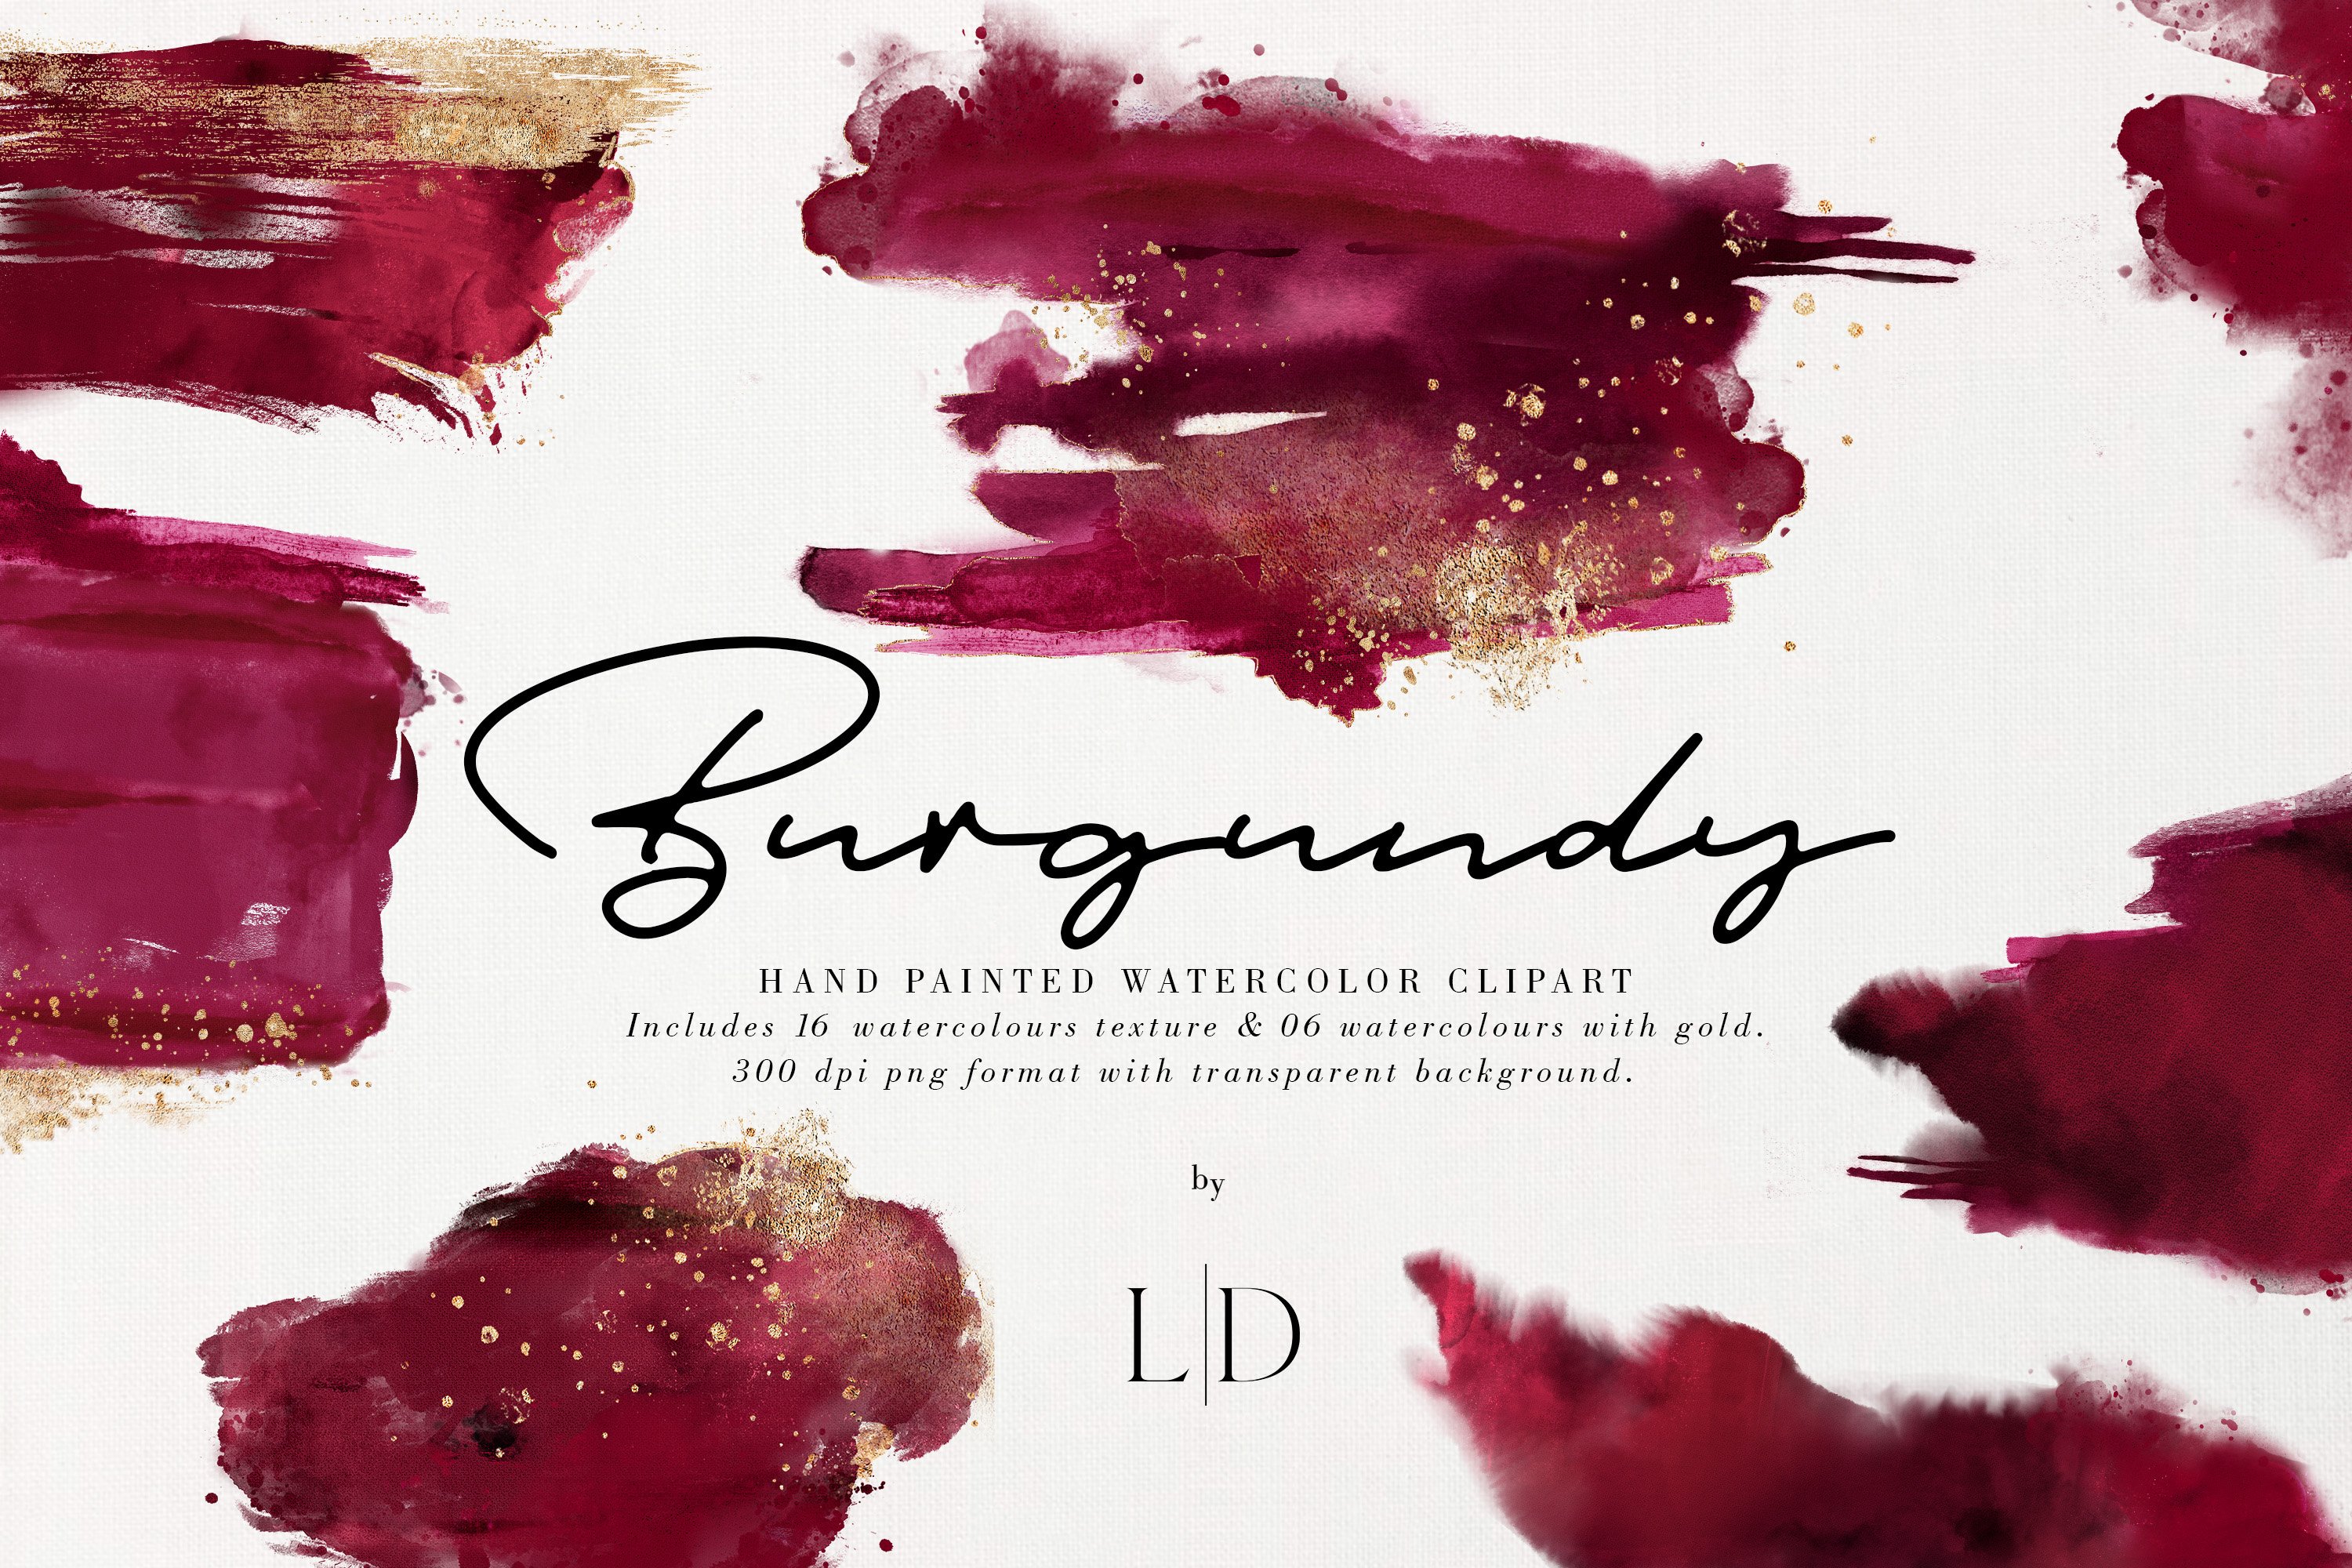 Burgundy Textures cover image.